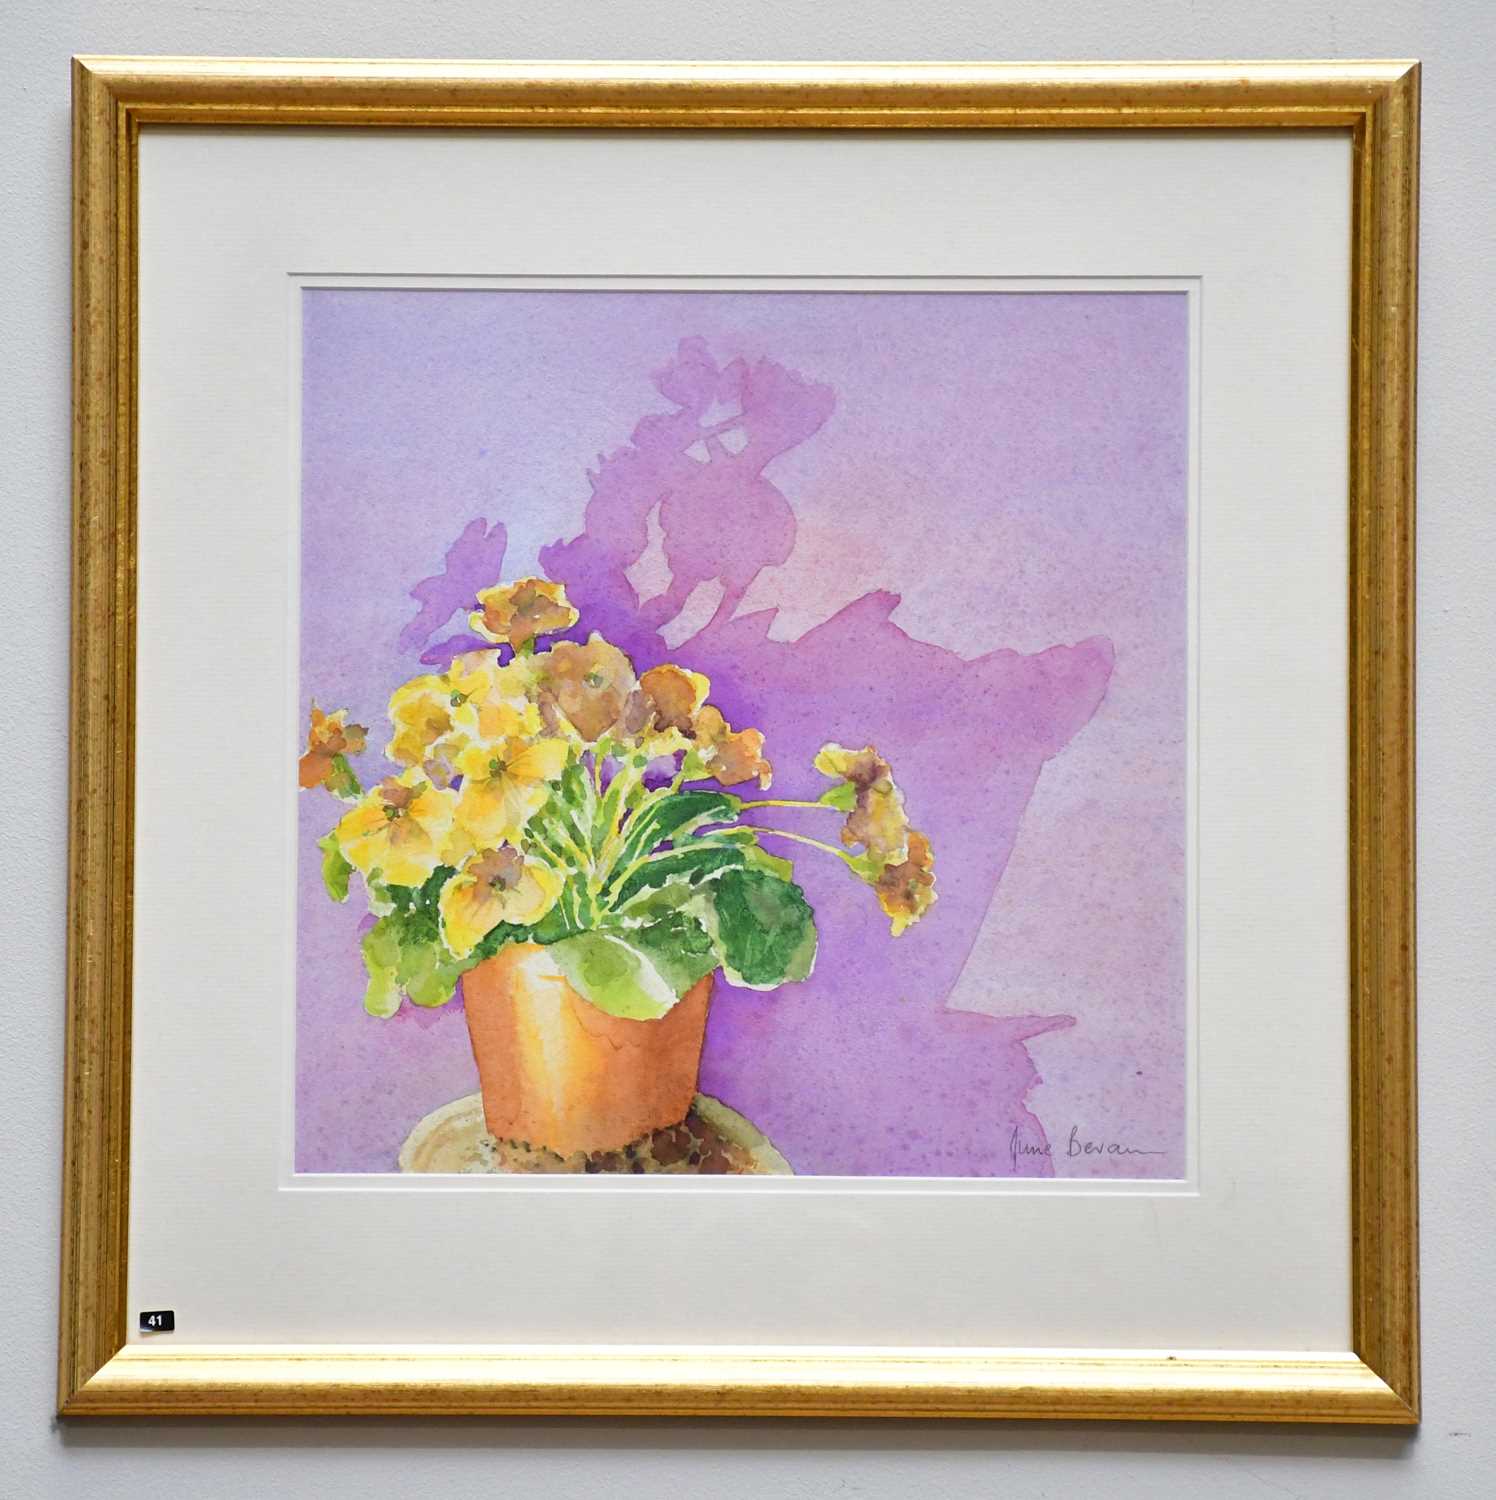 † JUNE BEVAN; watercolour, 'Yellow Primula on Pink', signed lower right, 33 x 33cm, framed and